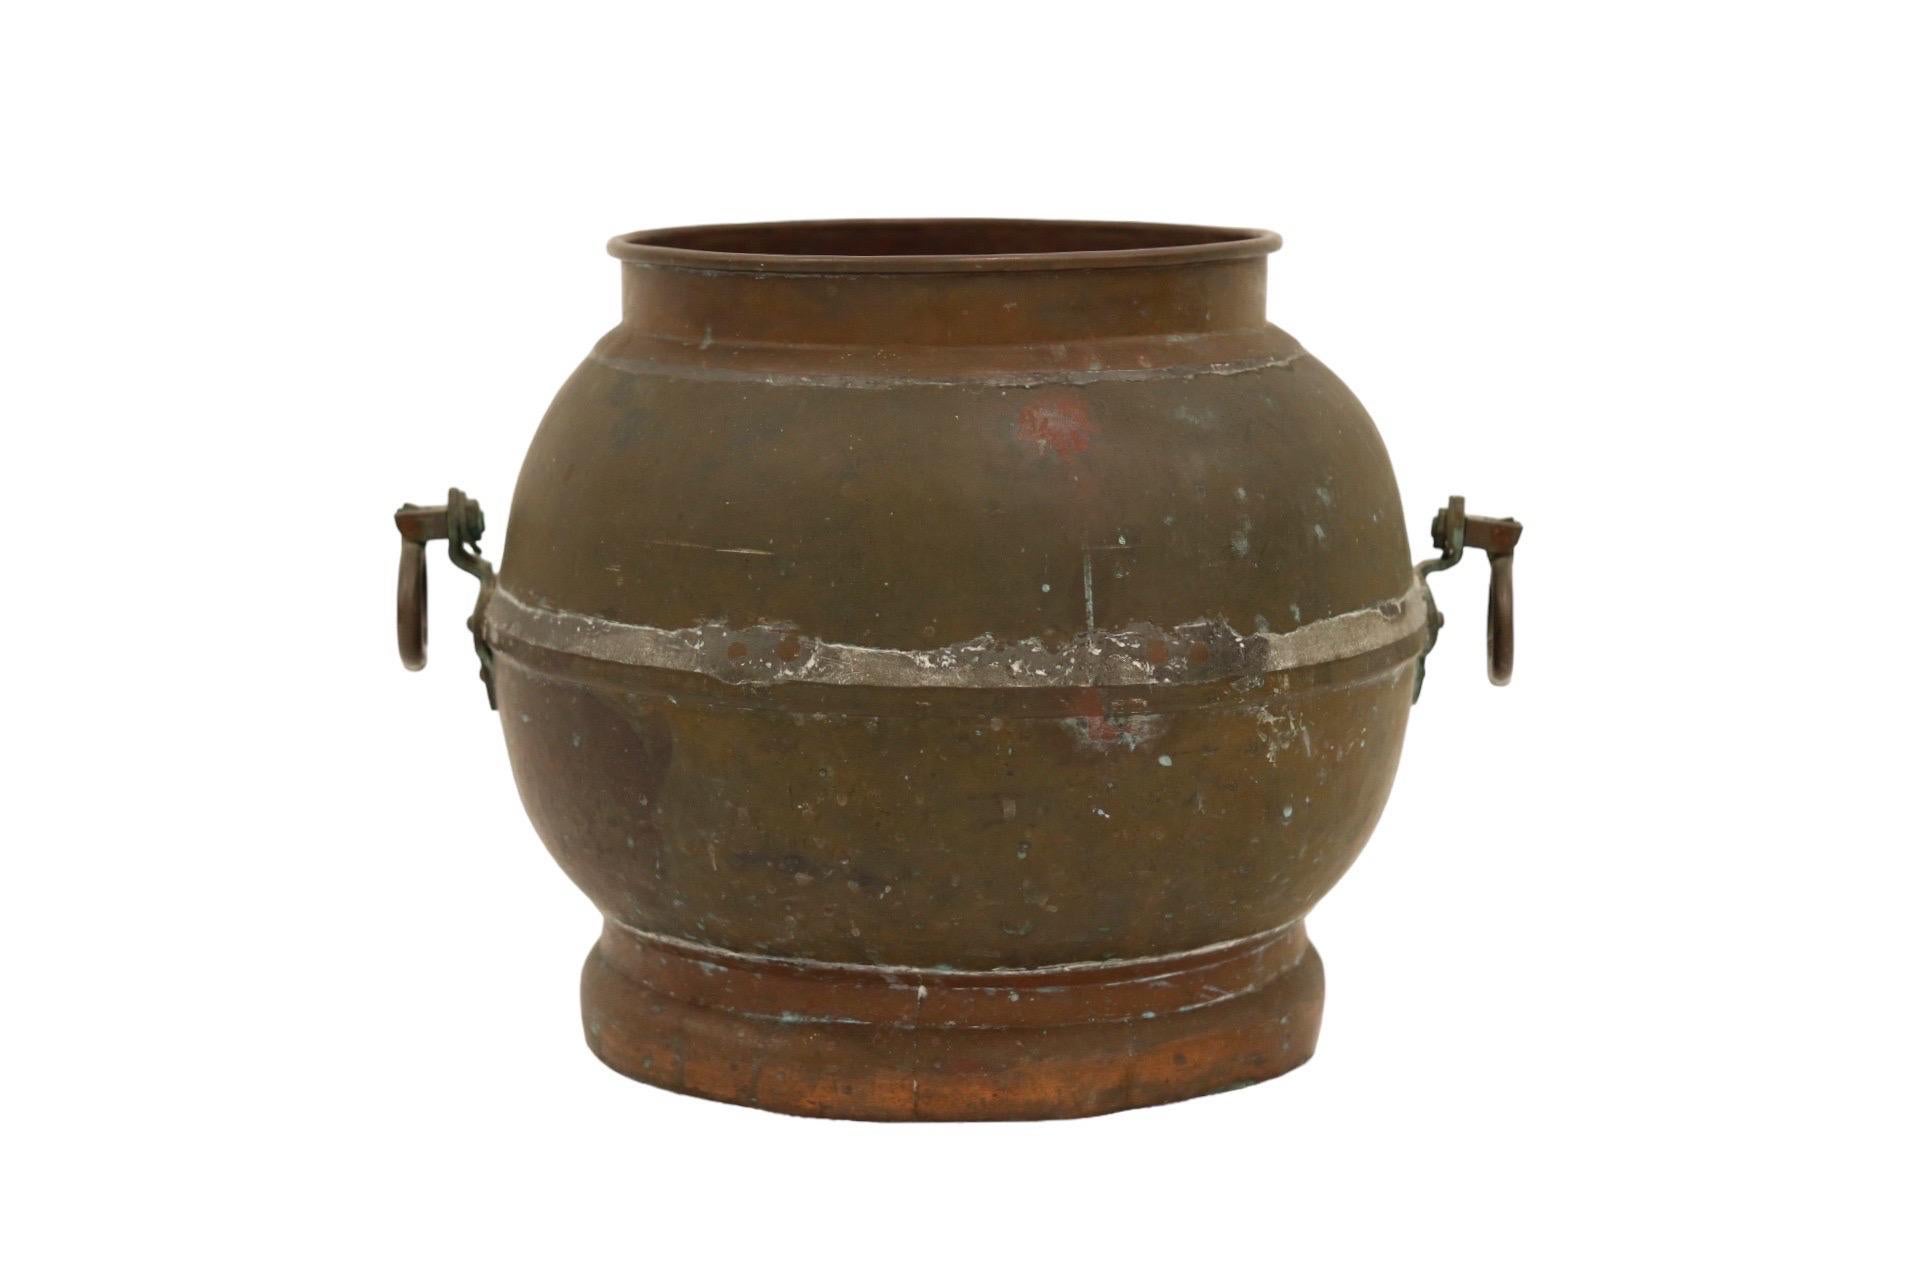 An antique copper planter. Made of two pieces soldered and secured with copper rivets. At each side is an oval drop handle pressed to give the look of a central bead. Finished with a copper lip and foot. Verdigris patina can be seen throughout.
